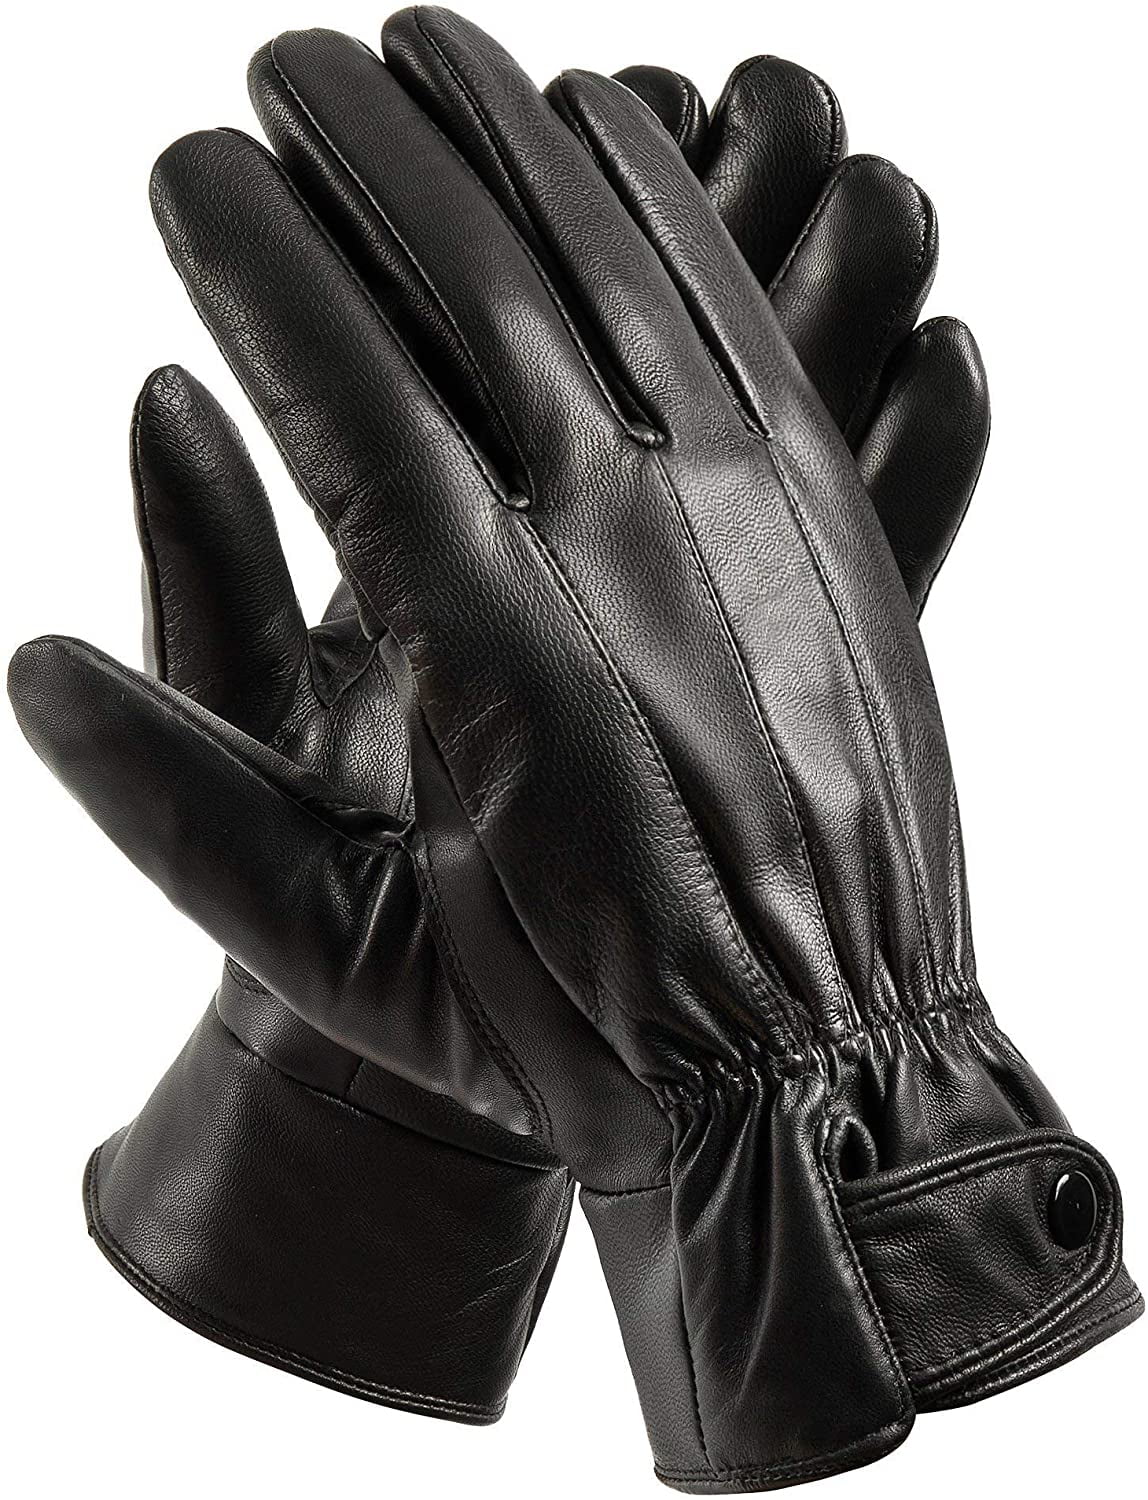 Mens New Genuine Super Soft Black Leather Driving Everyday Gloves Fully Lined 